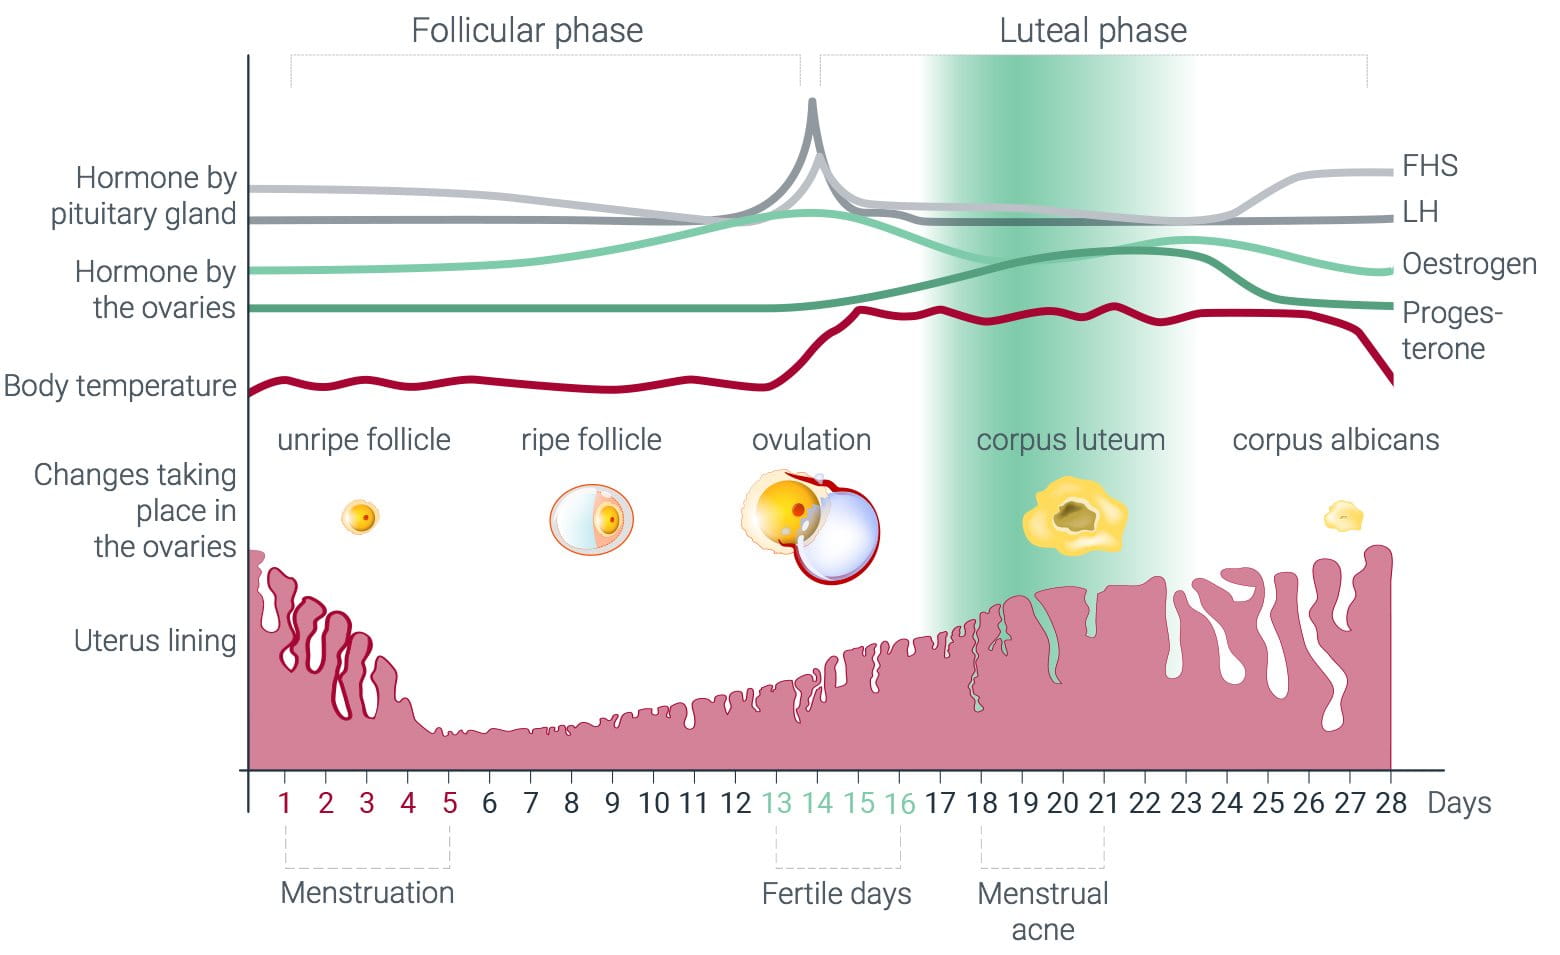 Hormone fluctuations during the menstrual cycle